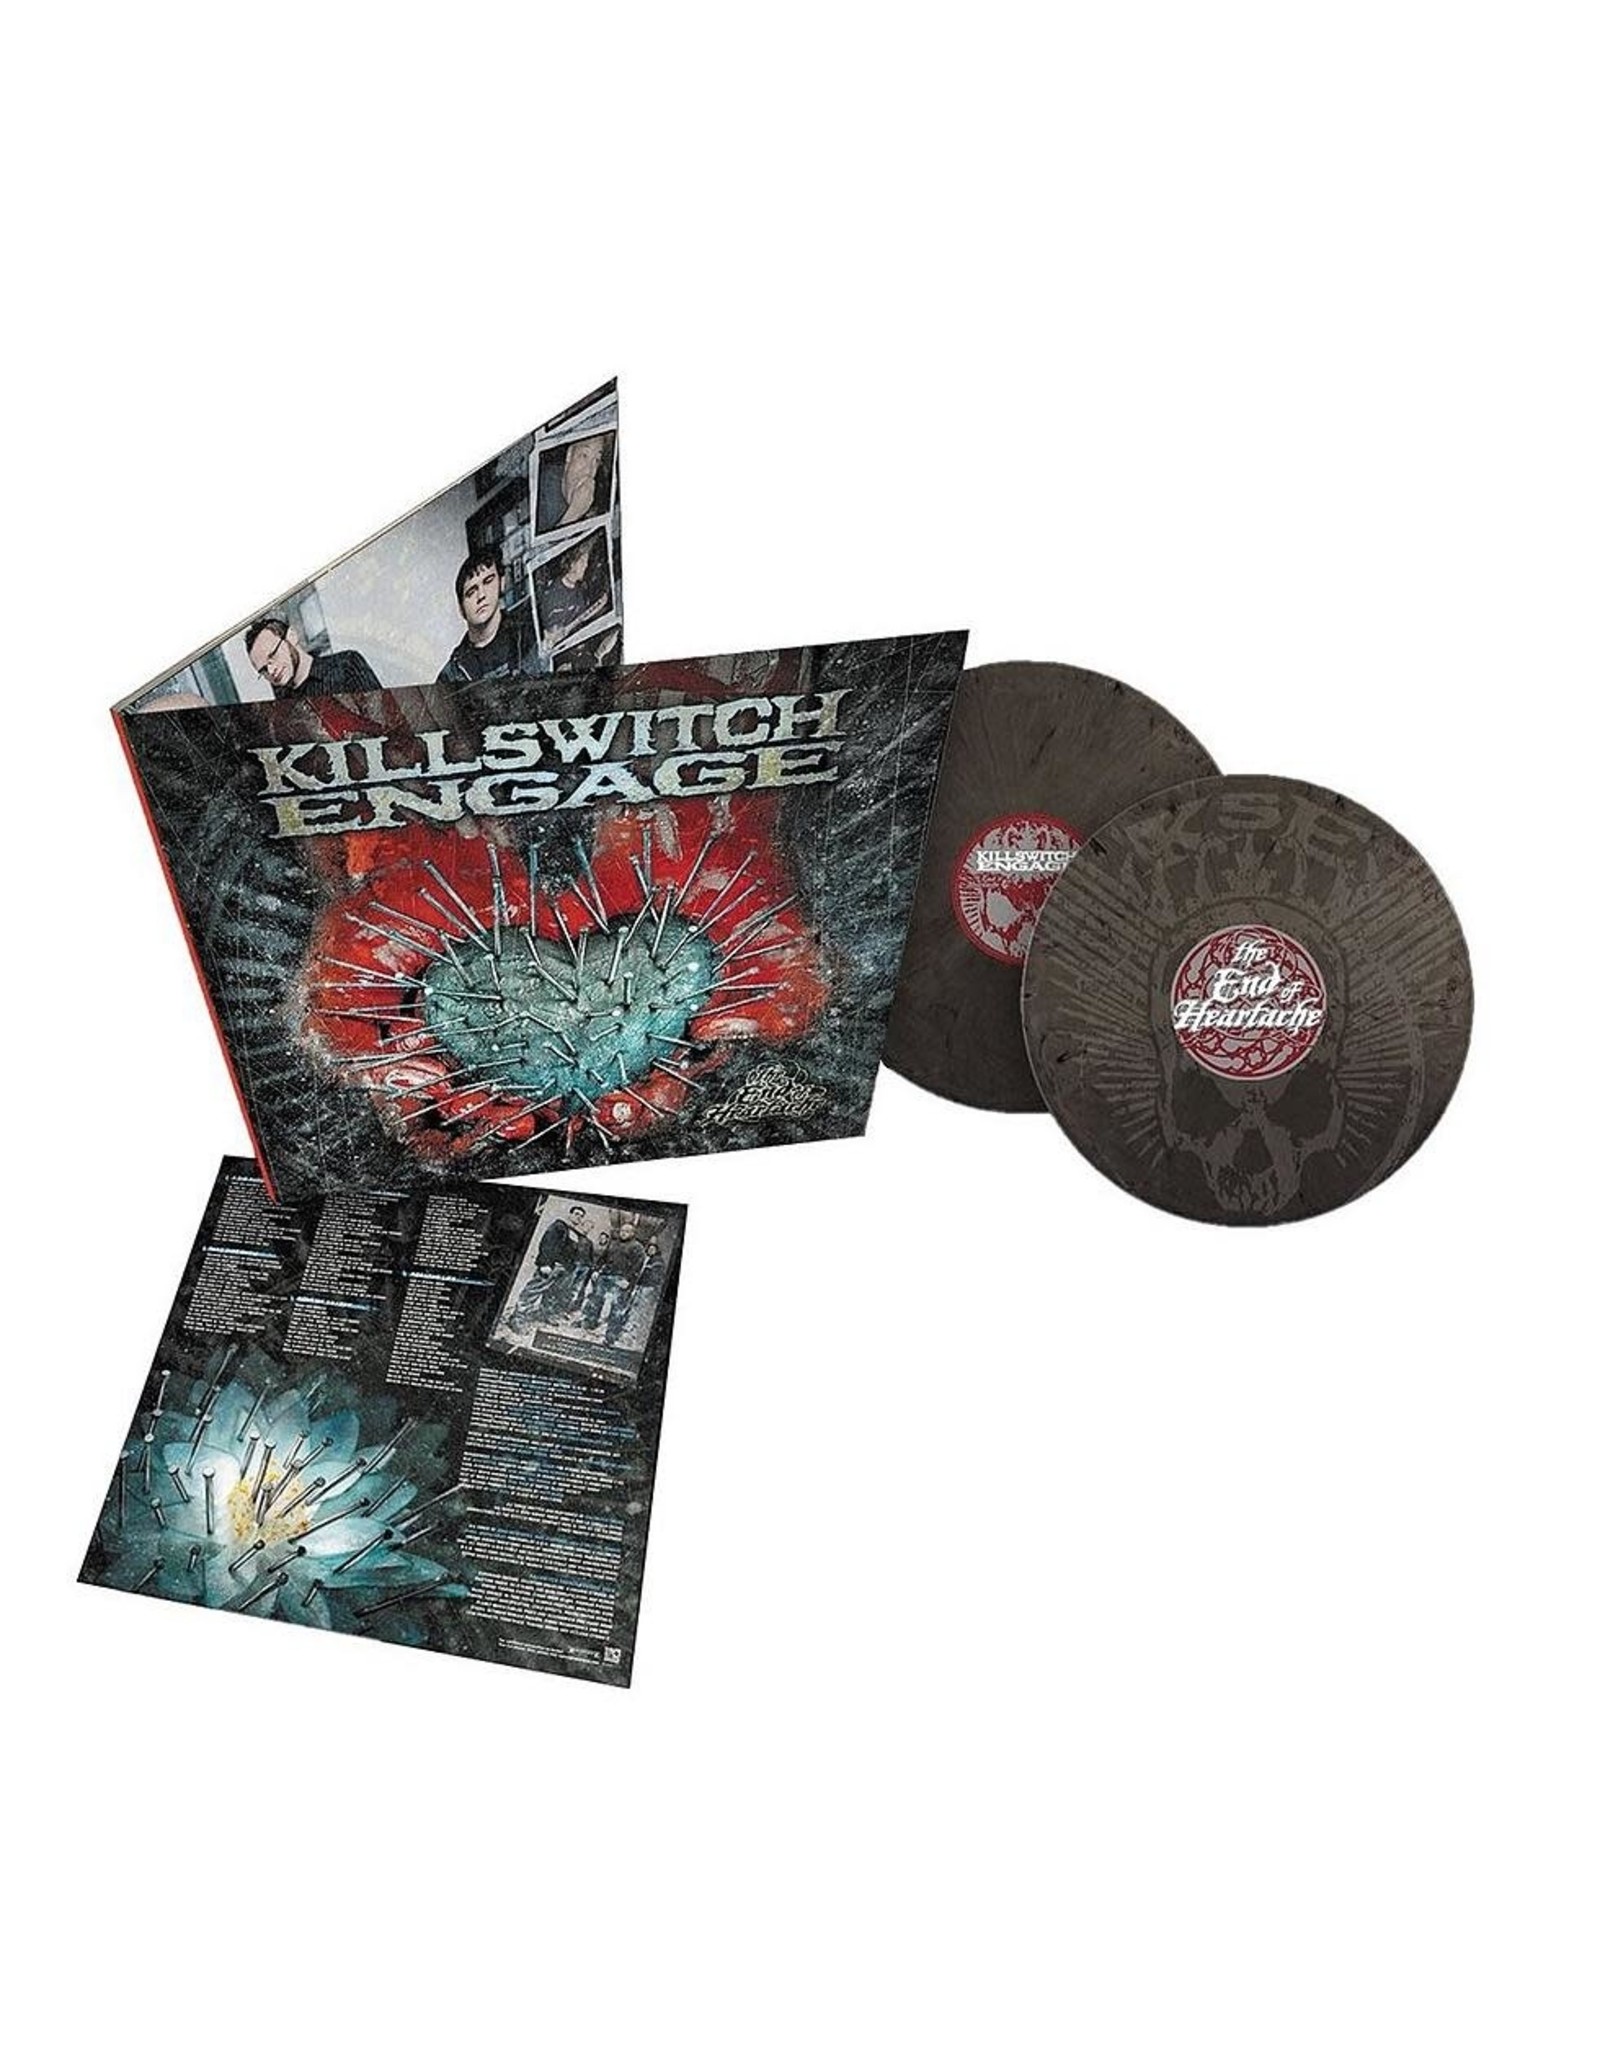 Killswitch Engage - The End Of Heartache (Exclusive Silver / Black Vinyl)